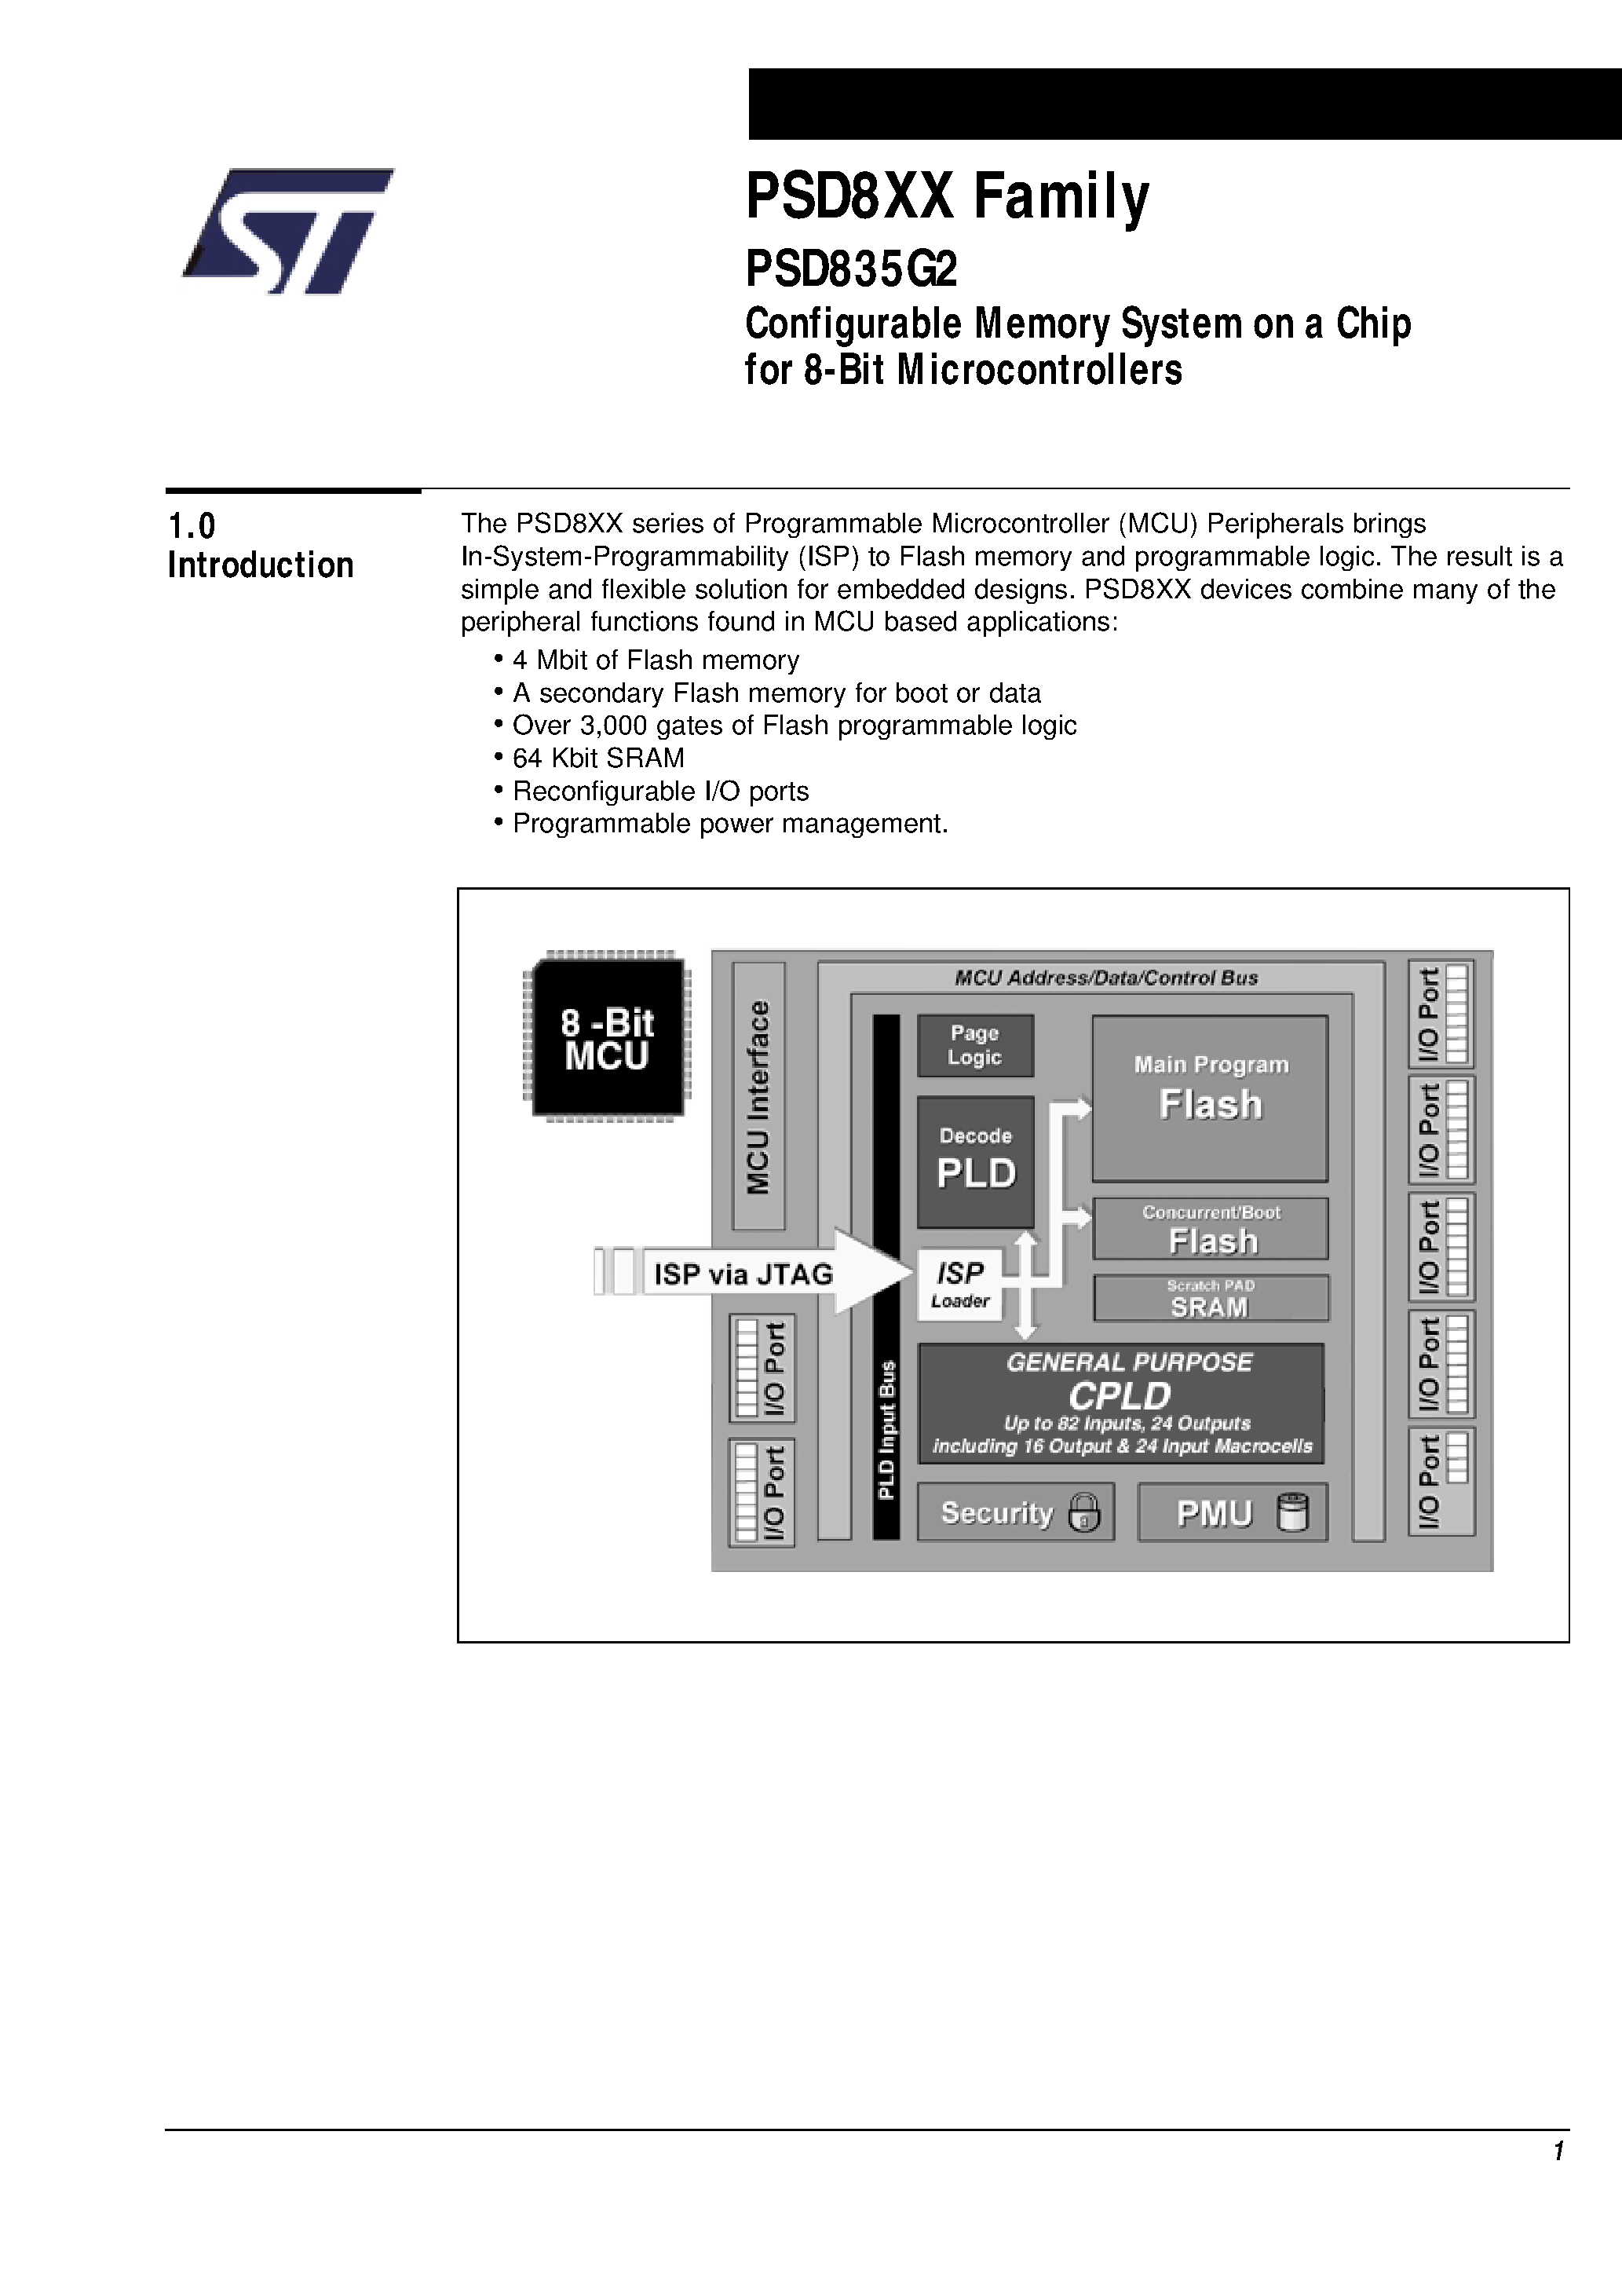 Datasheet PSD835F1-A-20B81 - Configurable Memory System on a Chip for 8-Bit Microcontrollers page 2